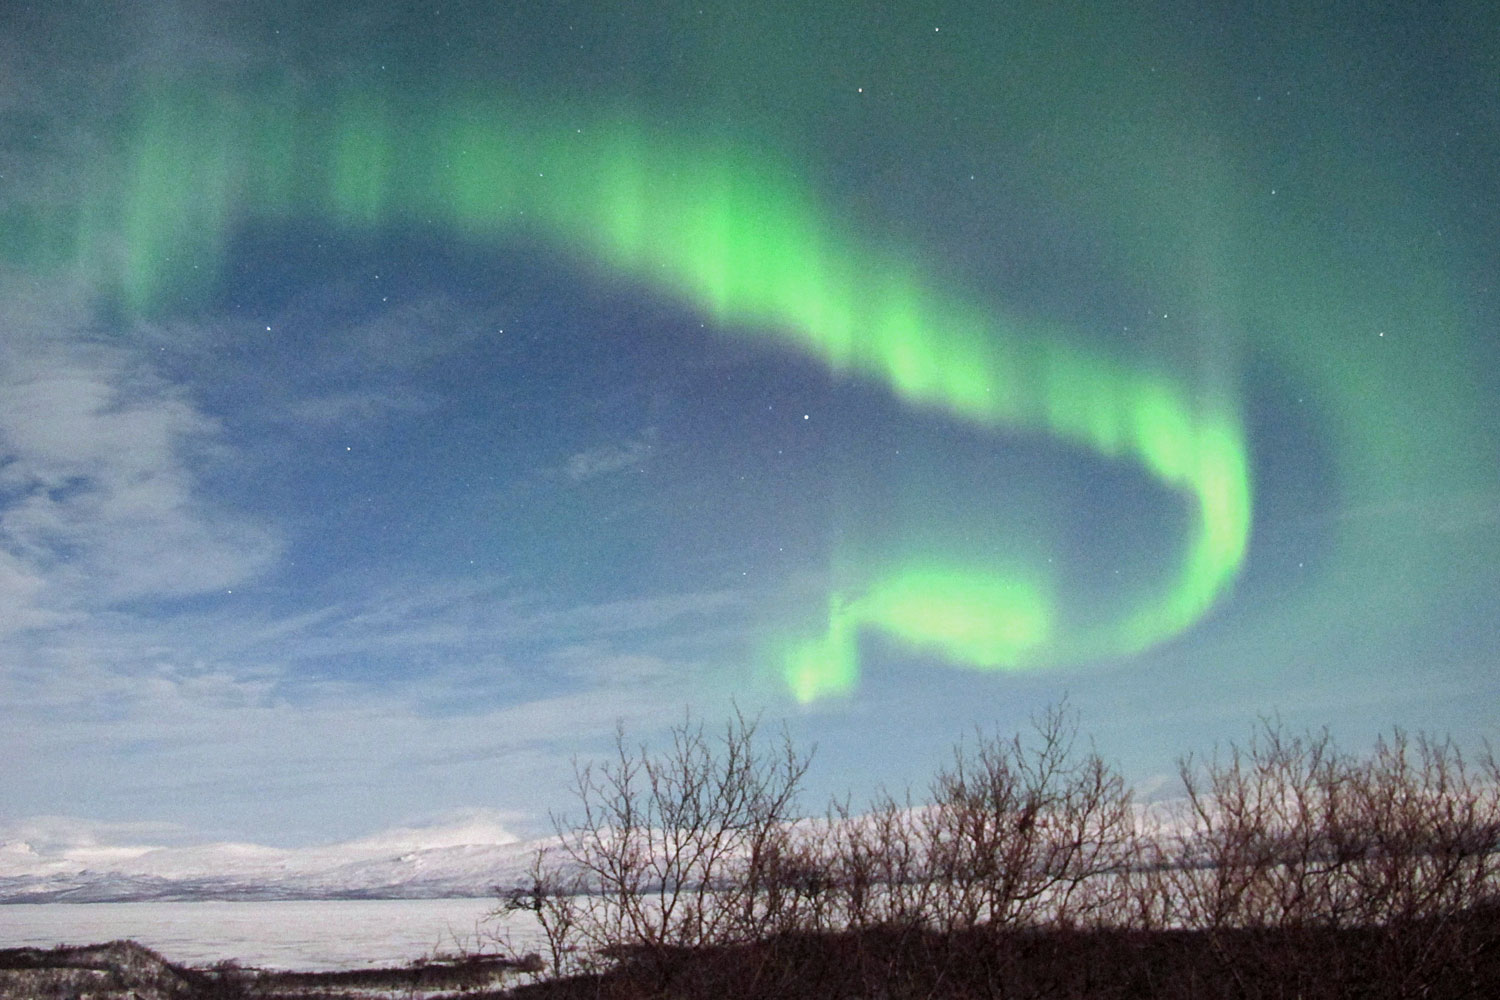 March 7, 2012. The northern lights in Abisko, Swedish Lapland.